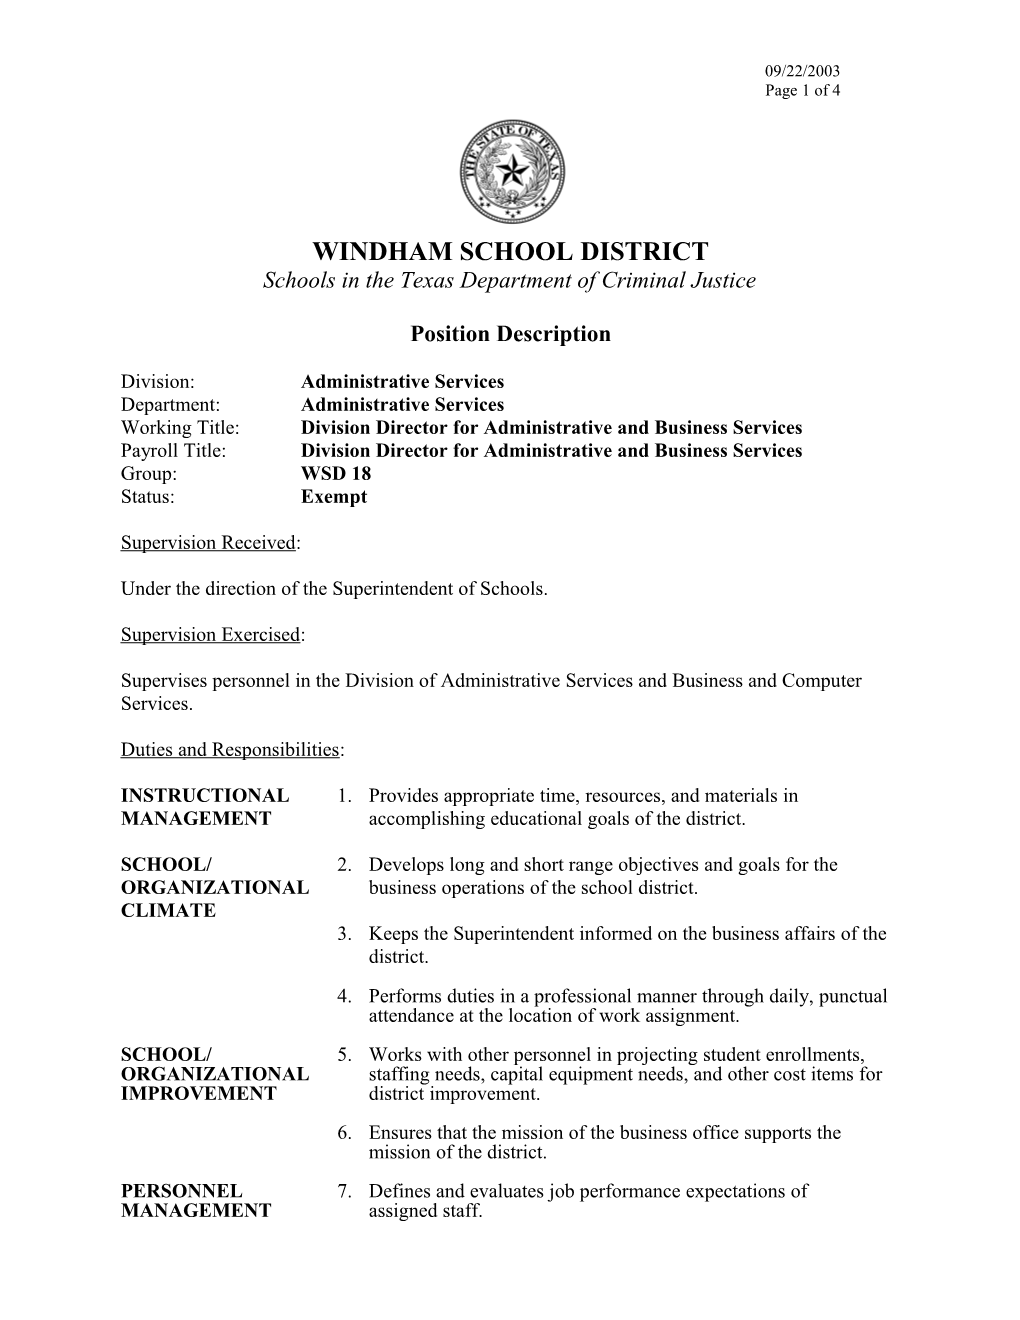 Division Director for Administrative and Business Services 09/22/2003